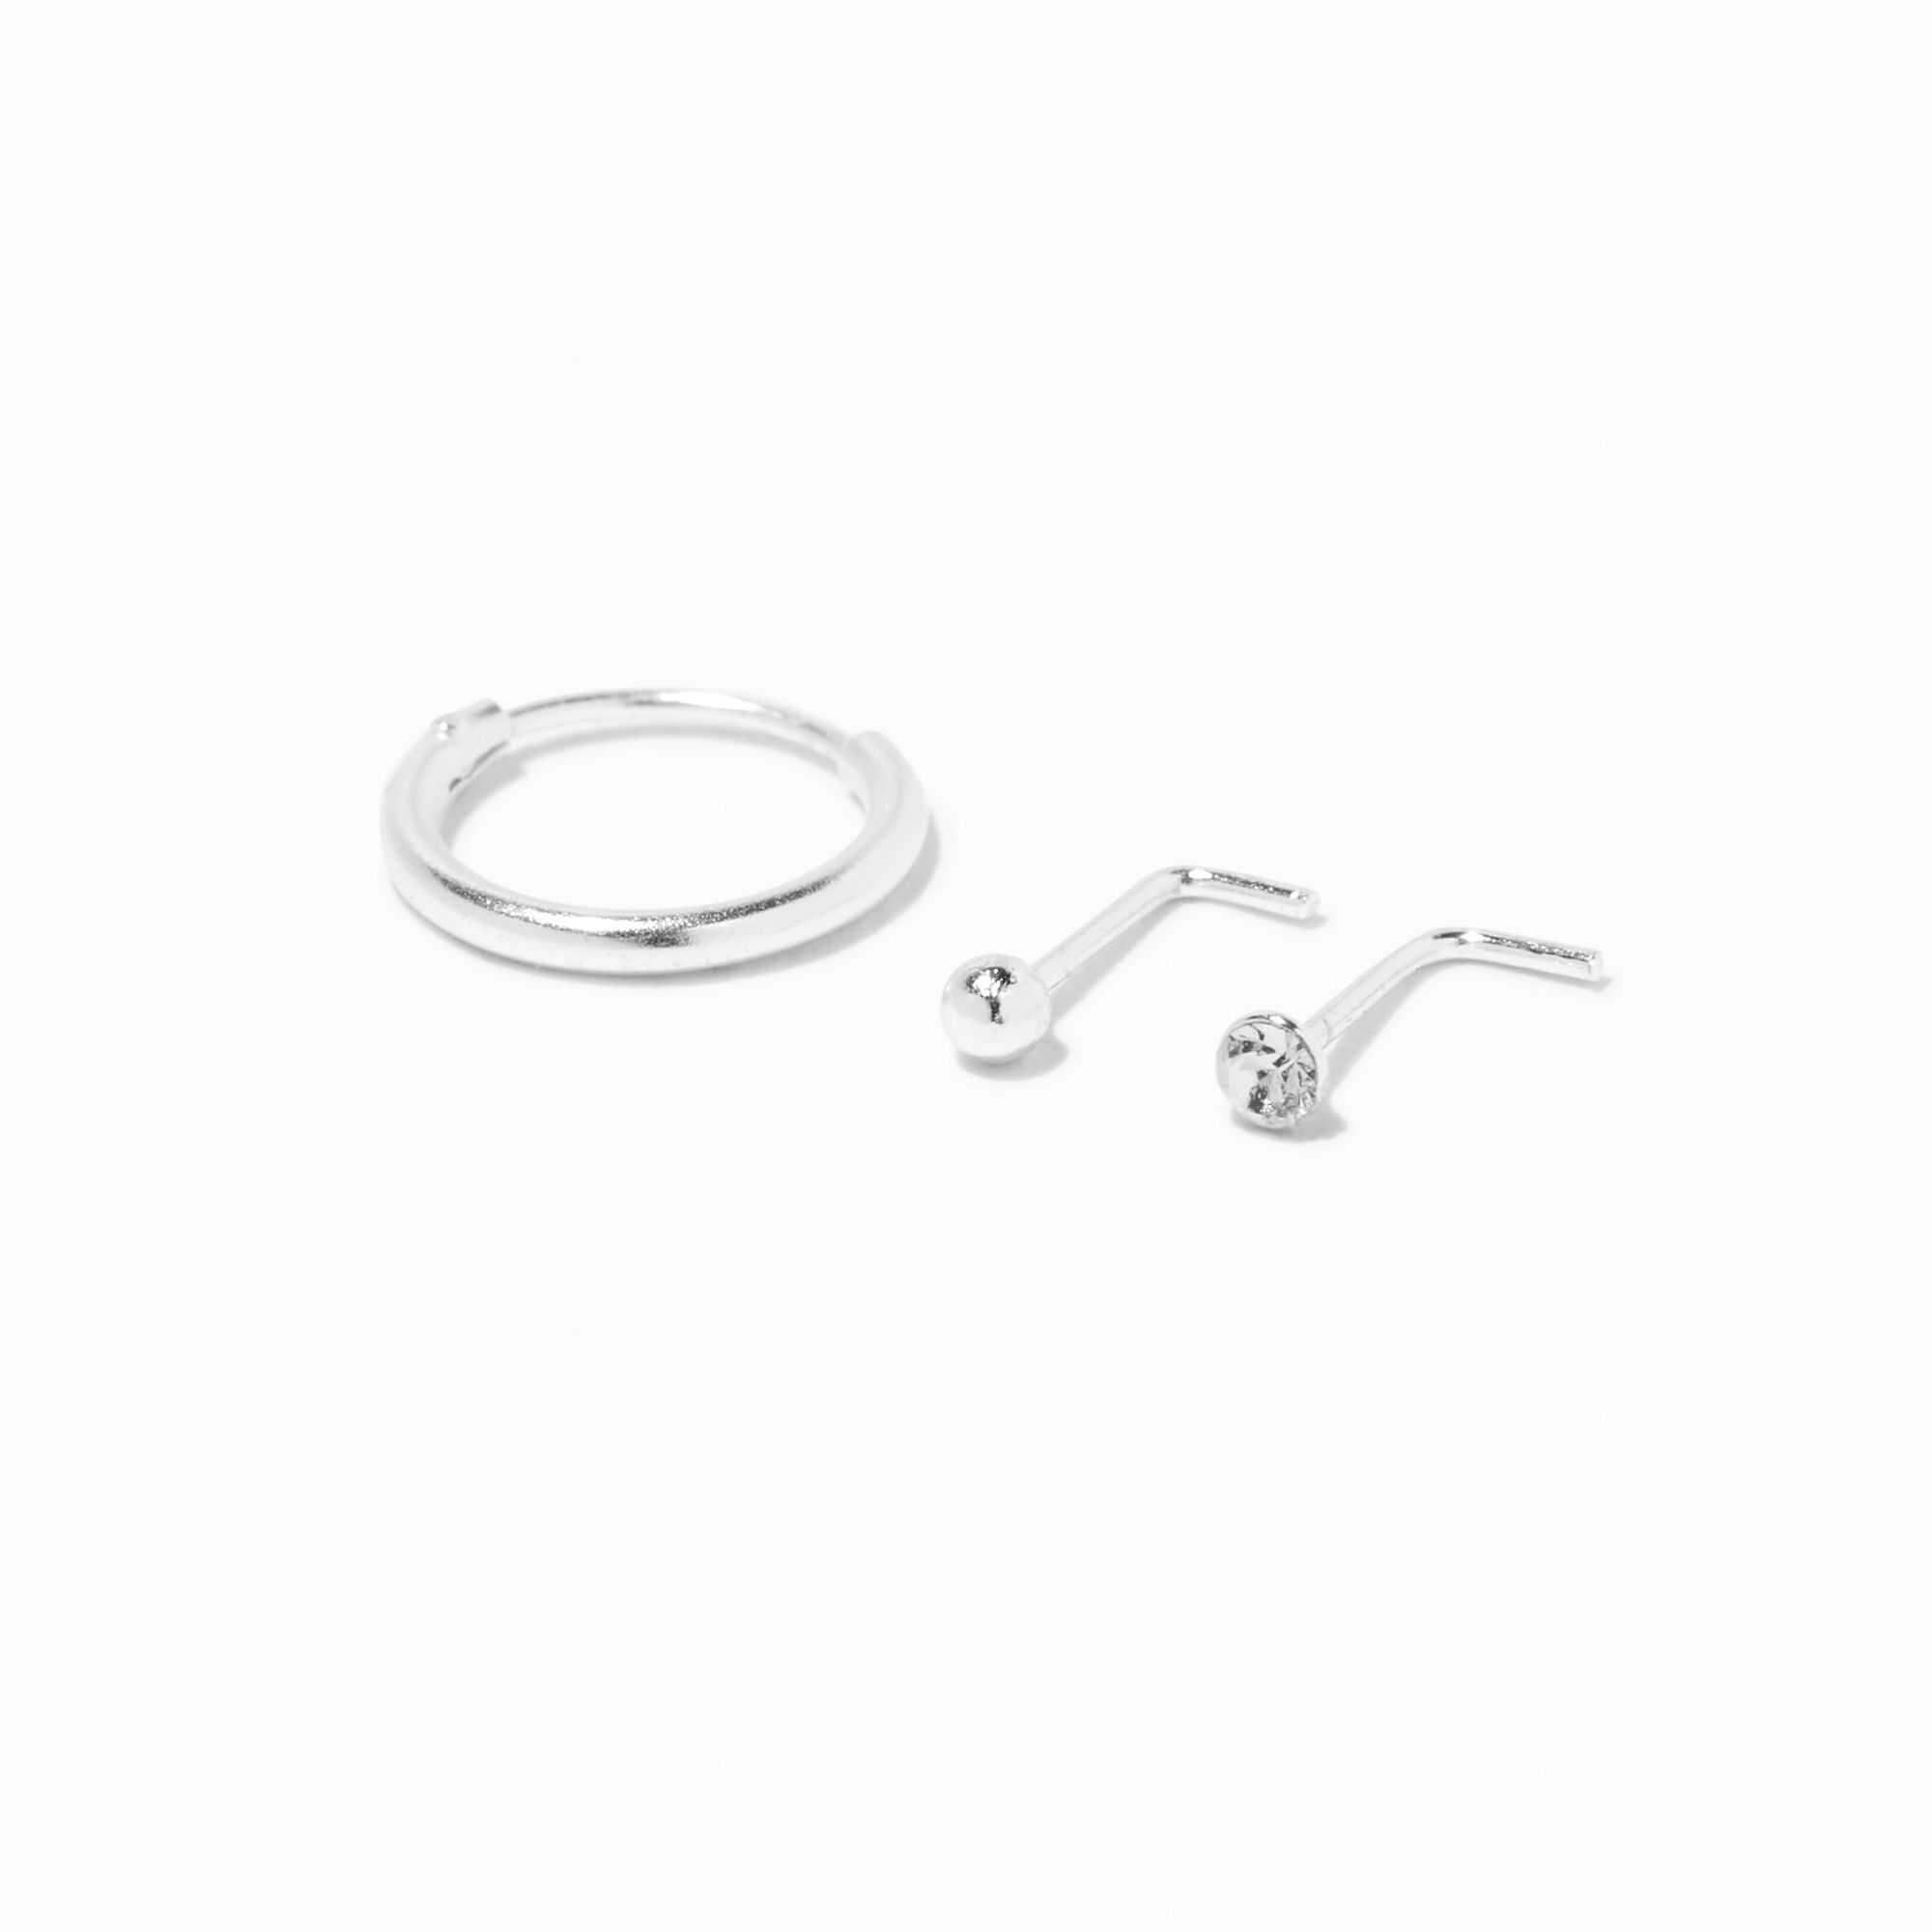 View Claires 22G Nose Rings Studs Set 3 Pack Silver information